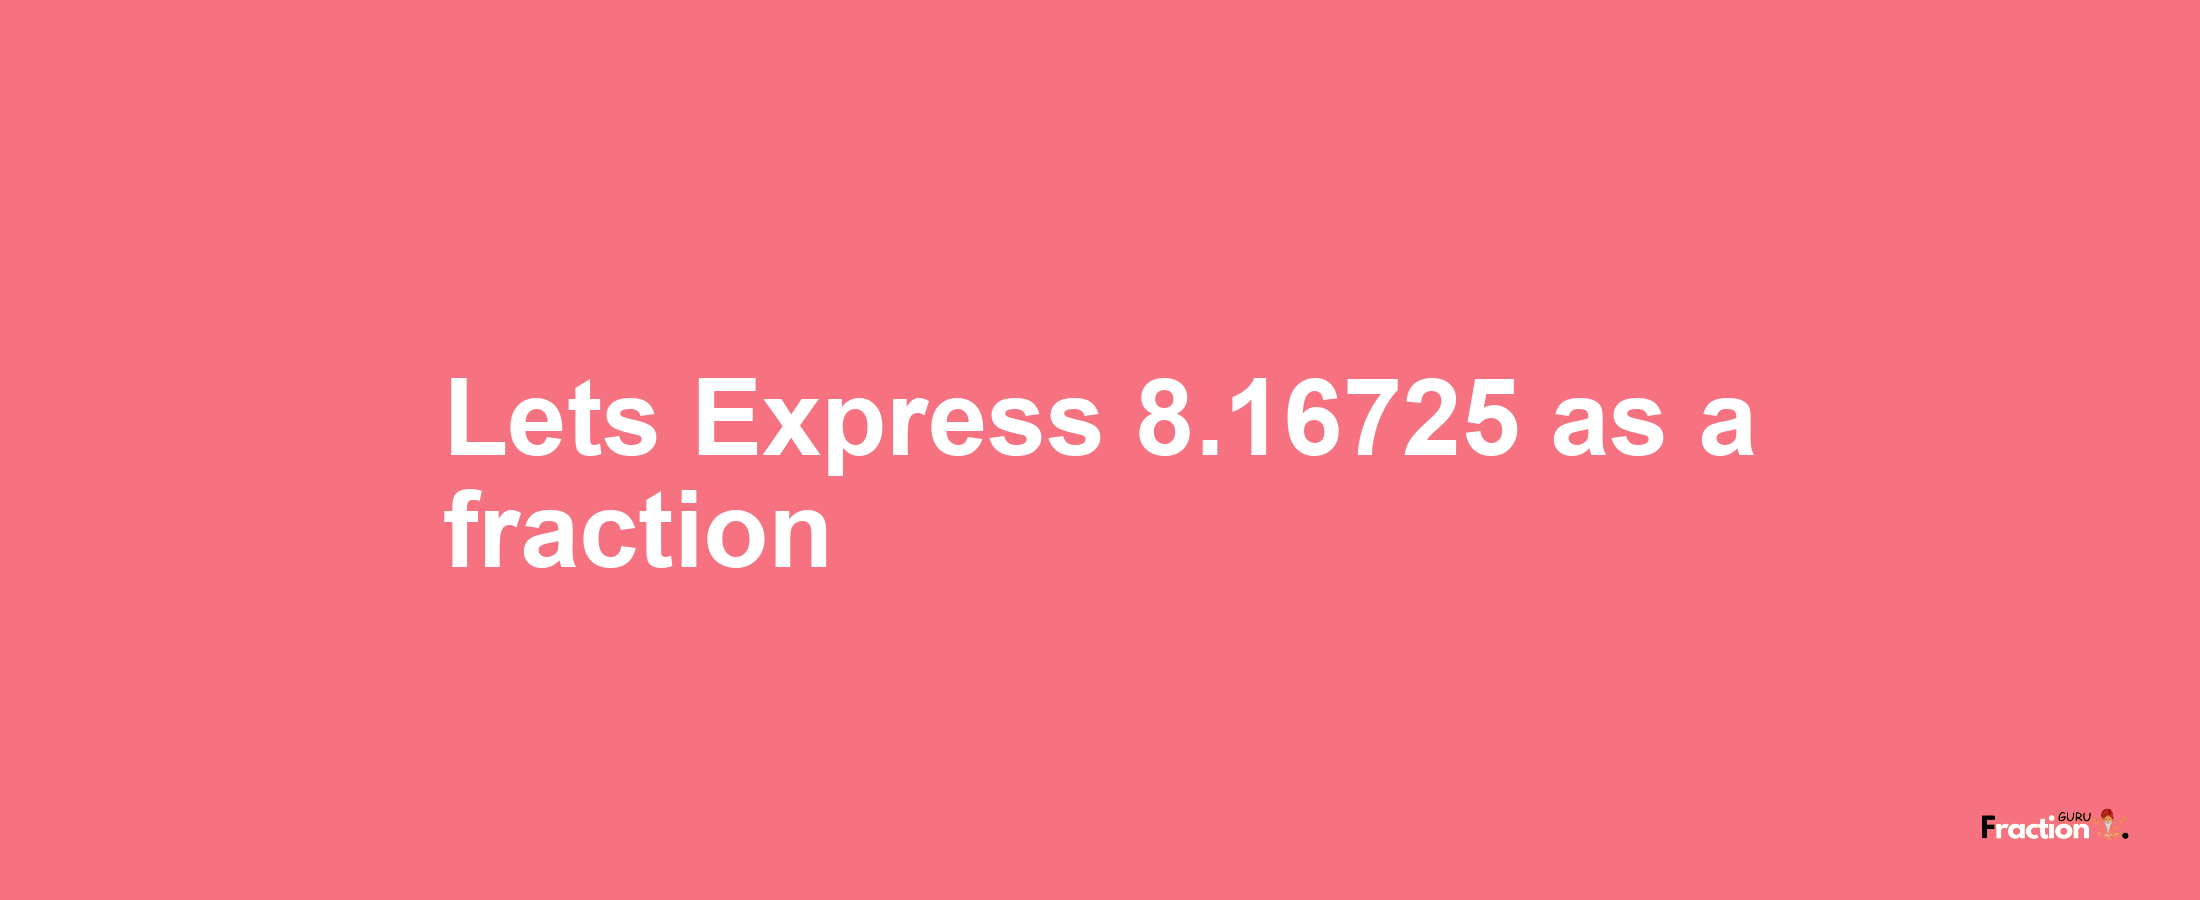 Lets Express 8.16725 as afraction